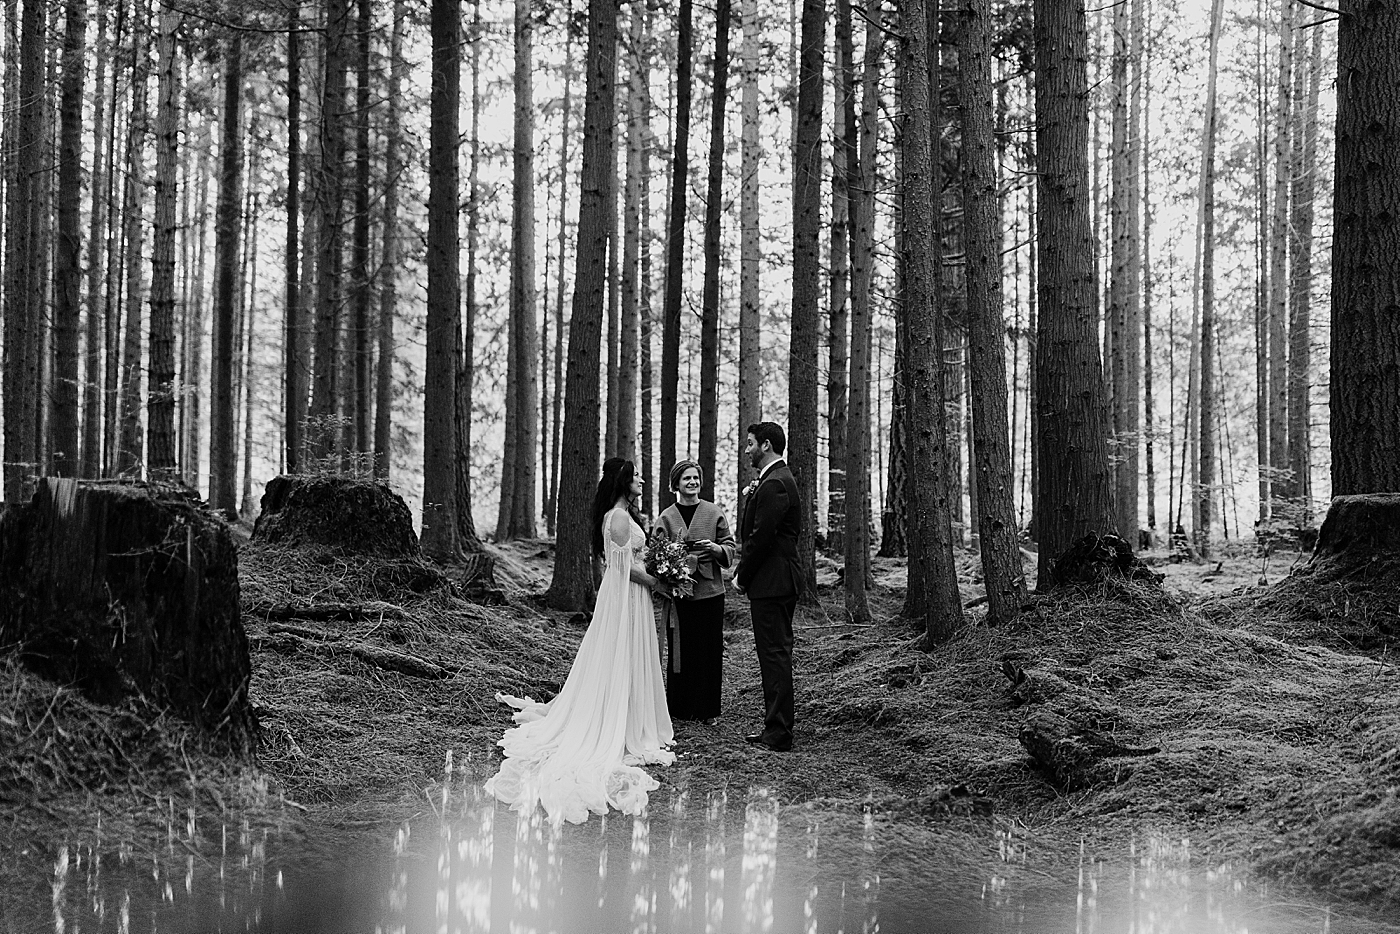 Intimate elopement at The Emerald Forest | Megan Montalvo Photography